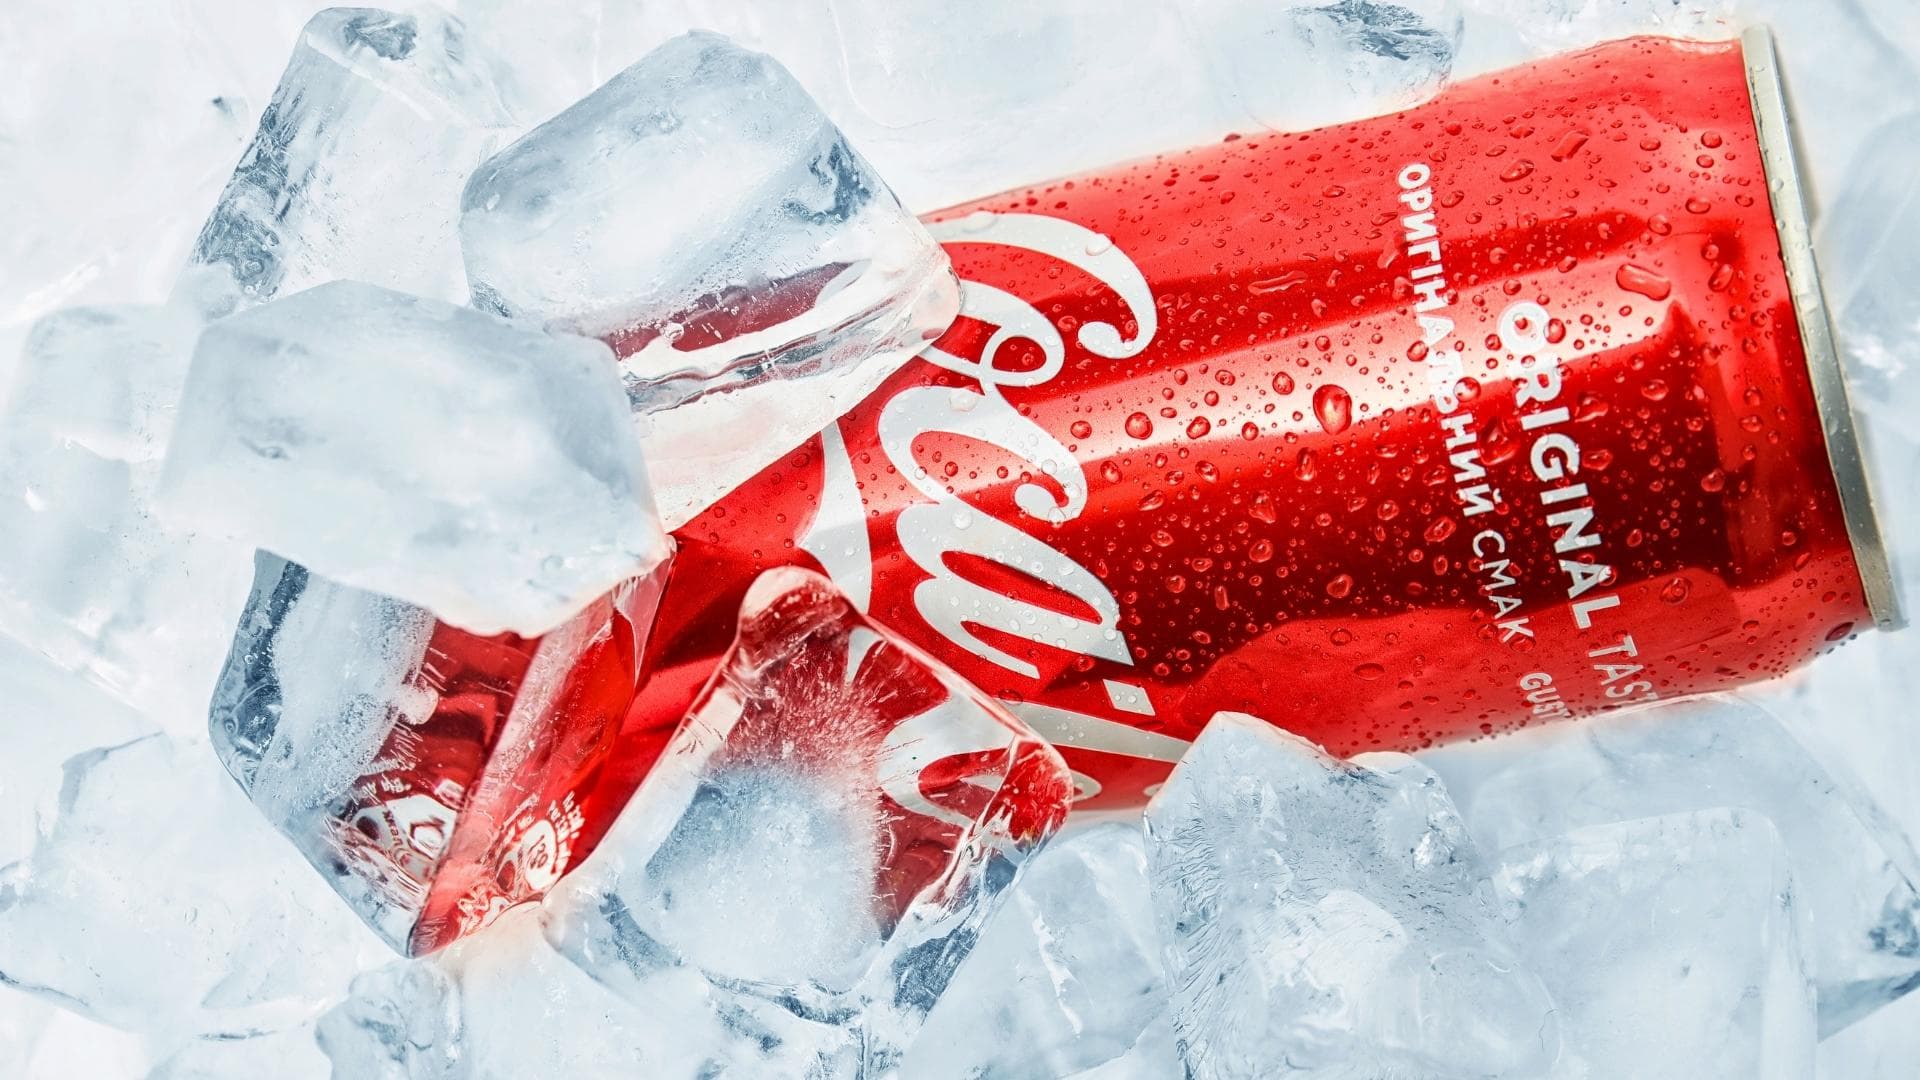 fresh voice over work for global brands : Coca Cola